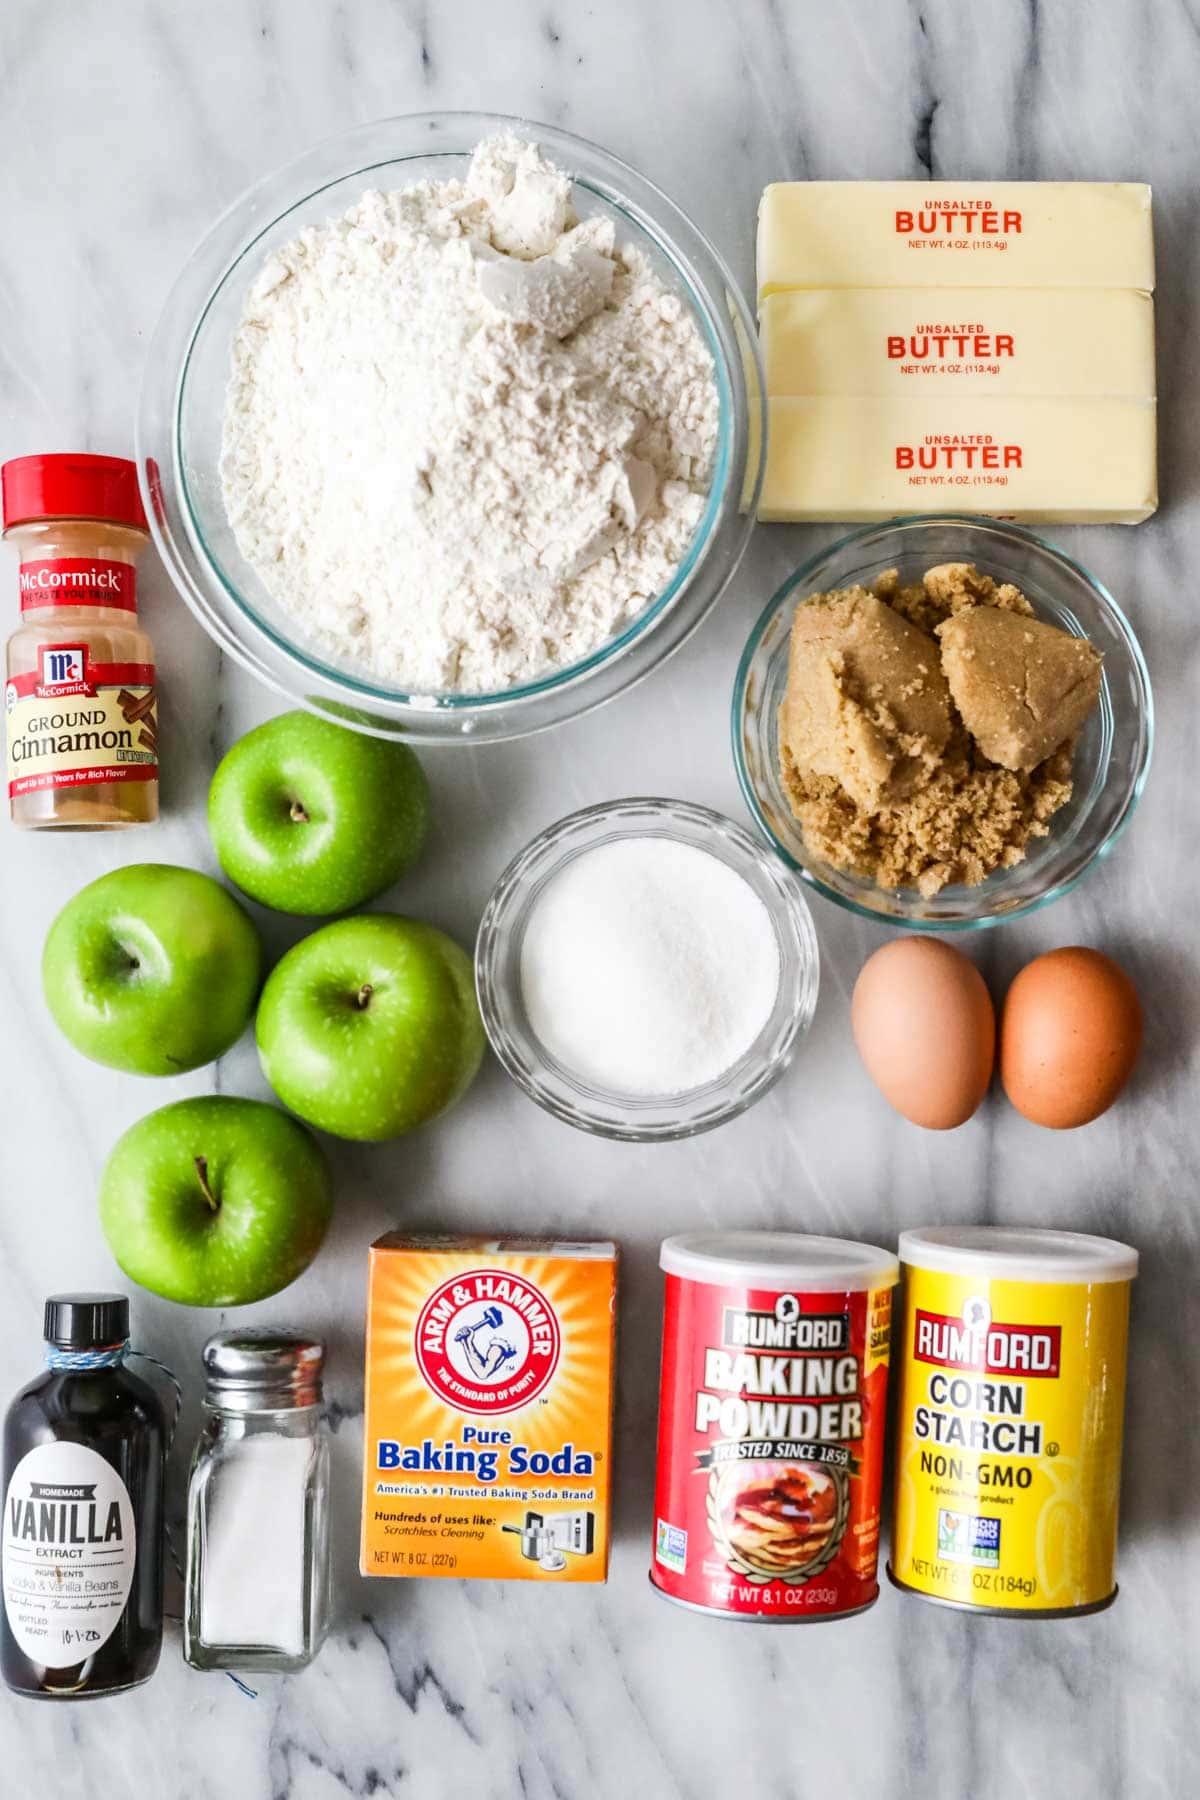 Overhead view of ingredients including apples, brown sugar, butter, and more.